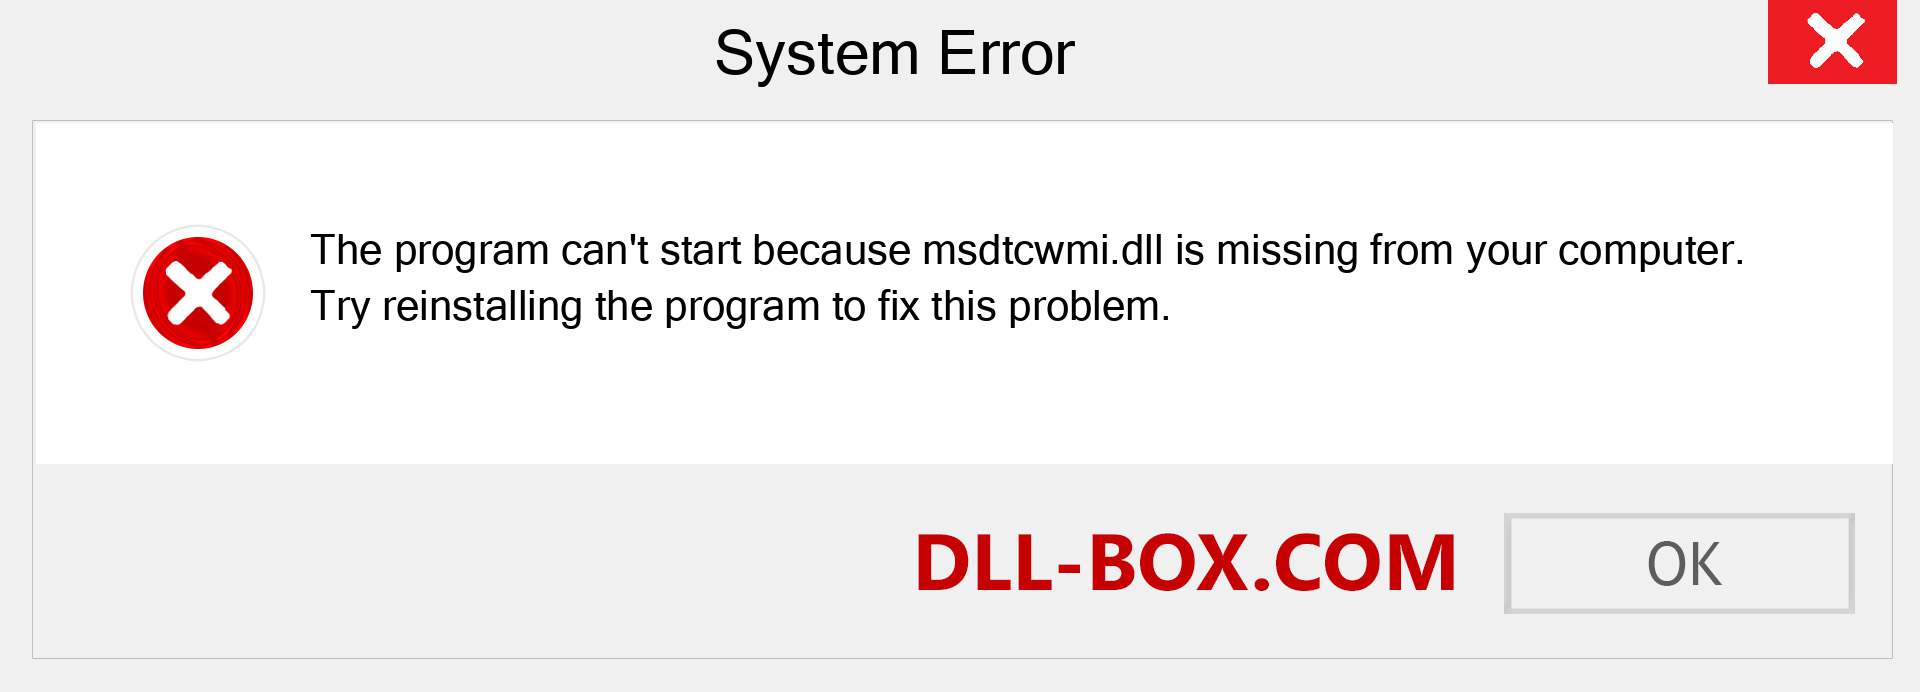  msdtcwmi.dll file is missing?. Download for Windows 7, 8, 10 - Fix  msdtcwmi dll Missing Error on Windows, photos, images